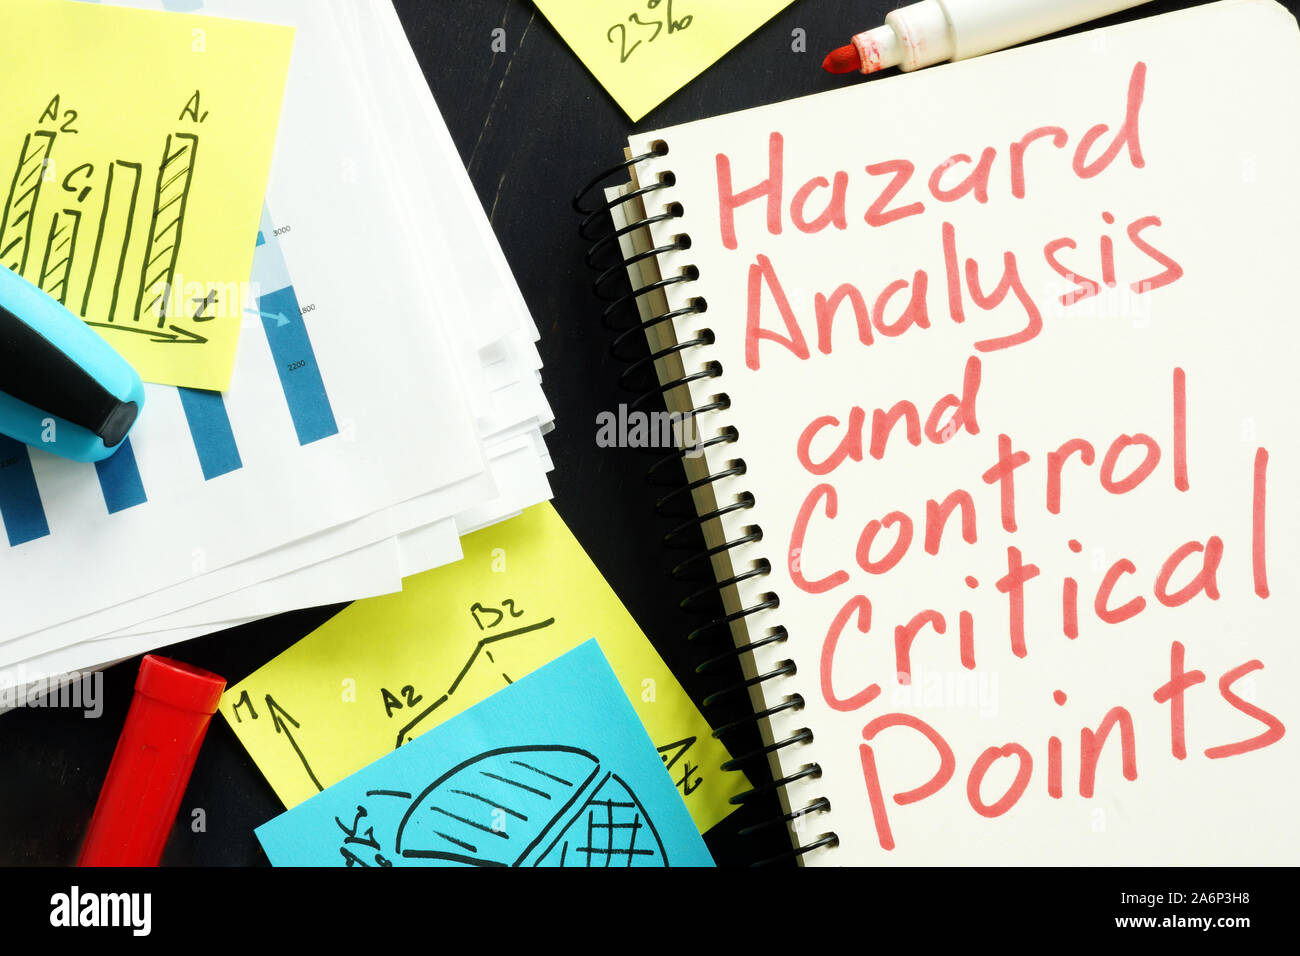 Hazard Analysis and Critical Control Points HACCP written on the page. Stock Photo